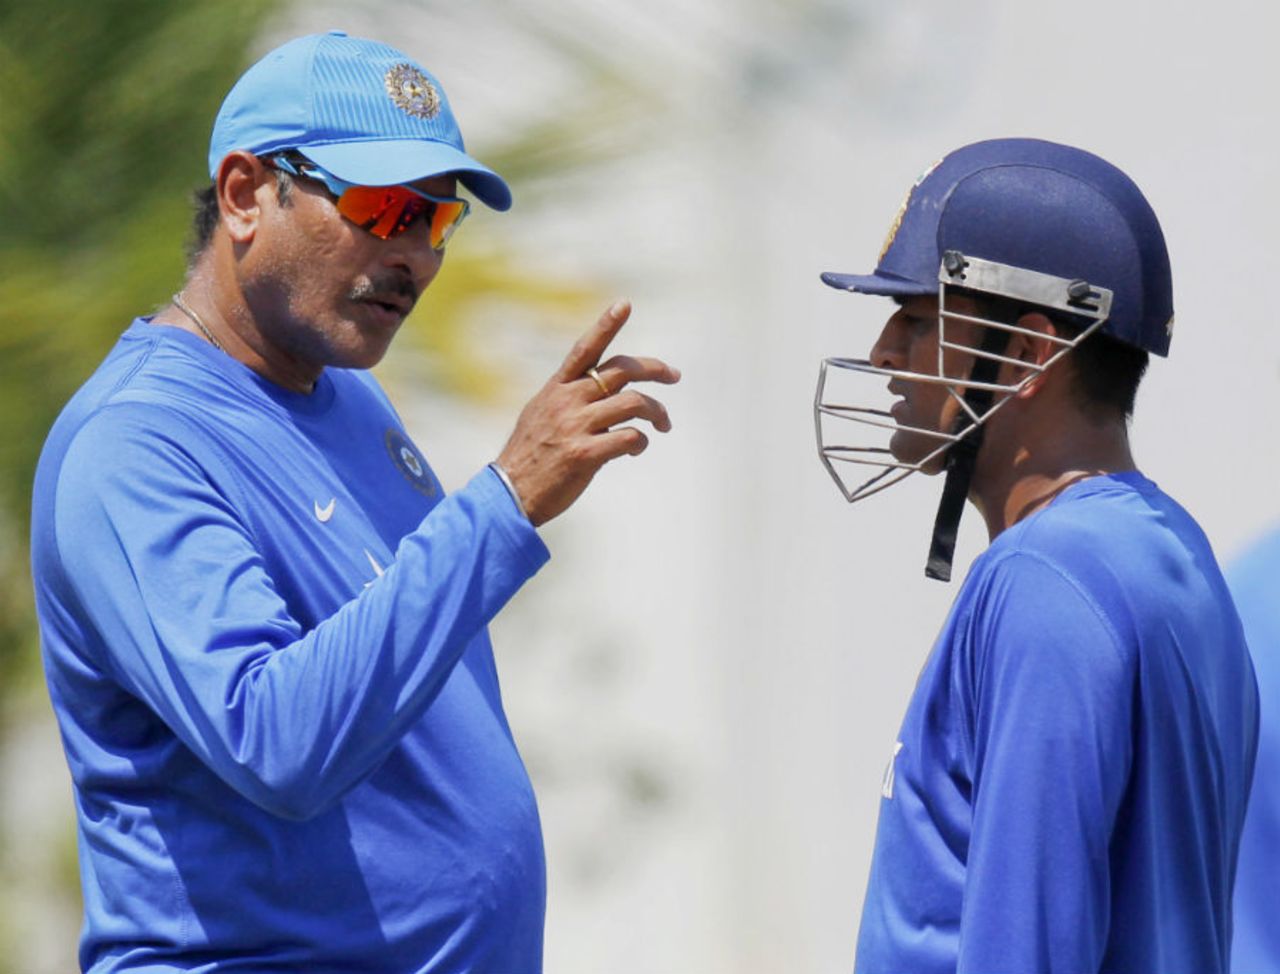 Ravi Shastri and MS Dhoni chat during a training session, Chennai, October 21, 2015